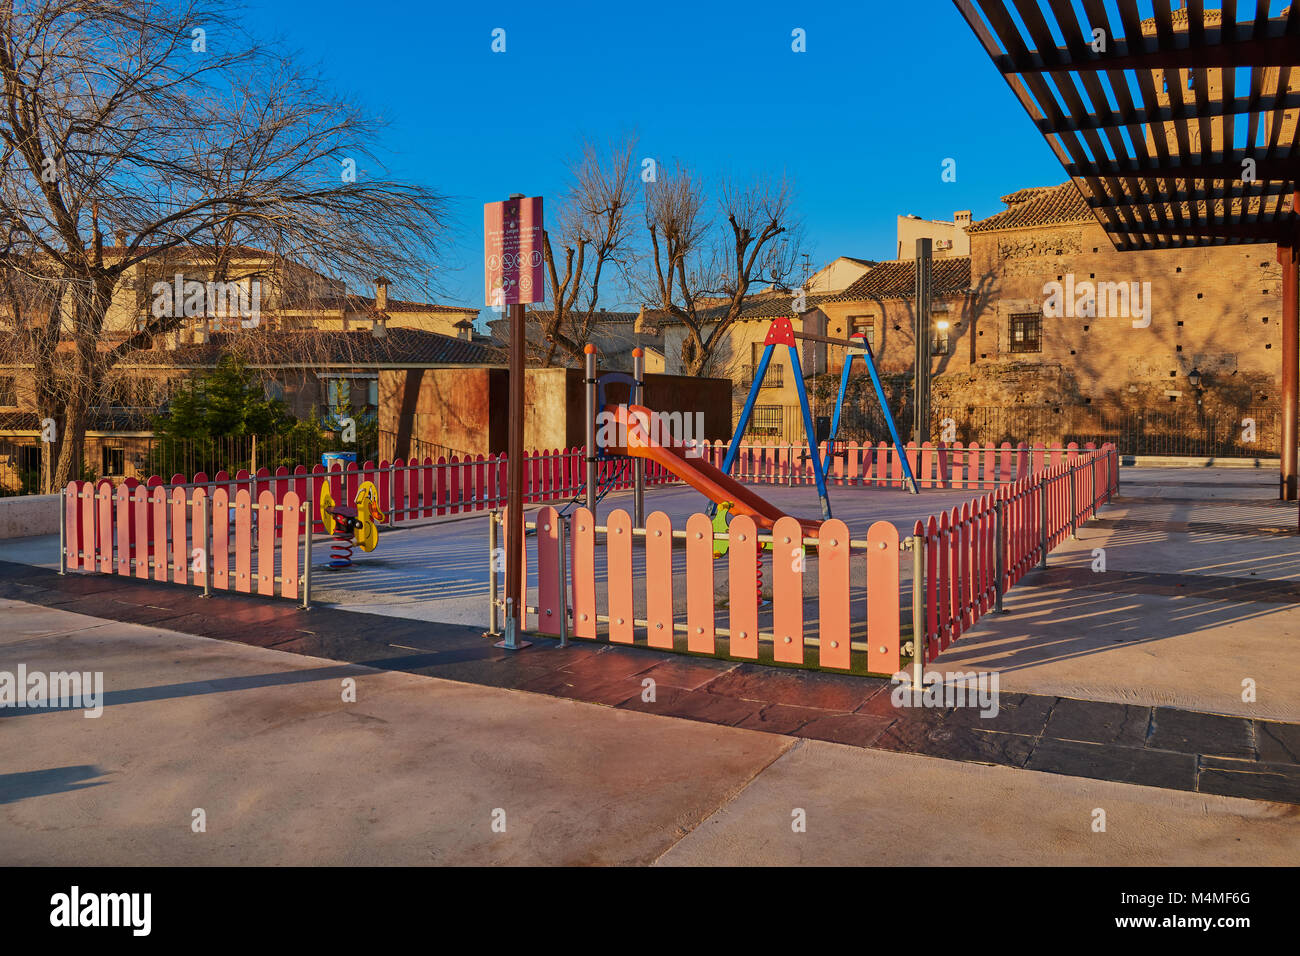 Children's playground with swings and slides dawning in Corralillo de San Miguel in Toledo, Spain Stock Photo